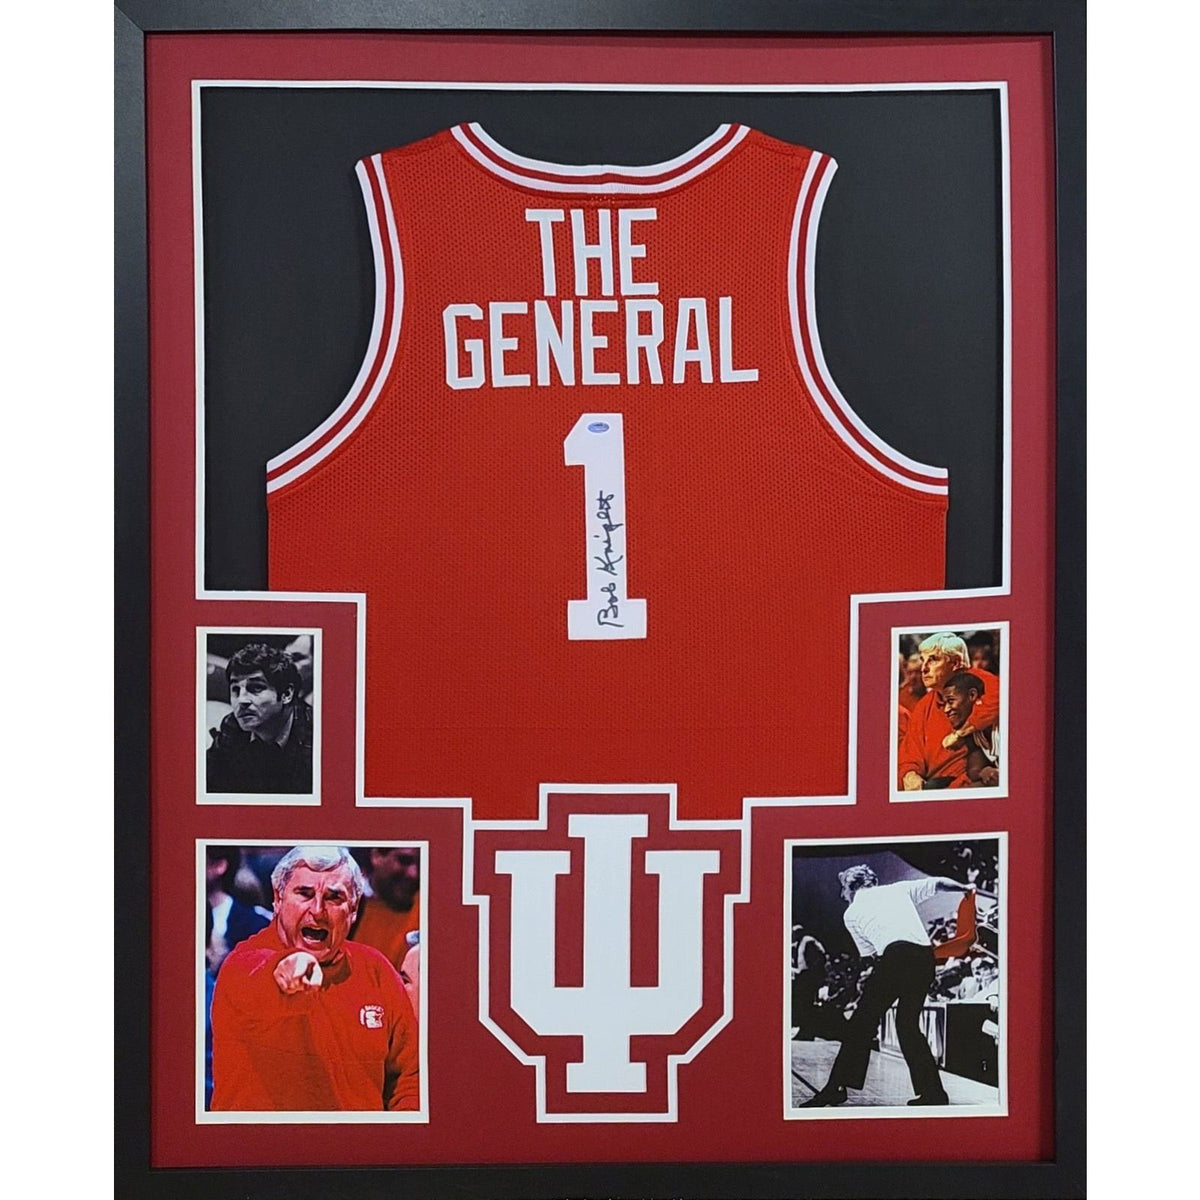 Bobby Knight The General Framed Jersey Schwartz Autographed Signed Indiana